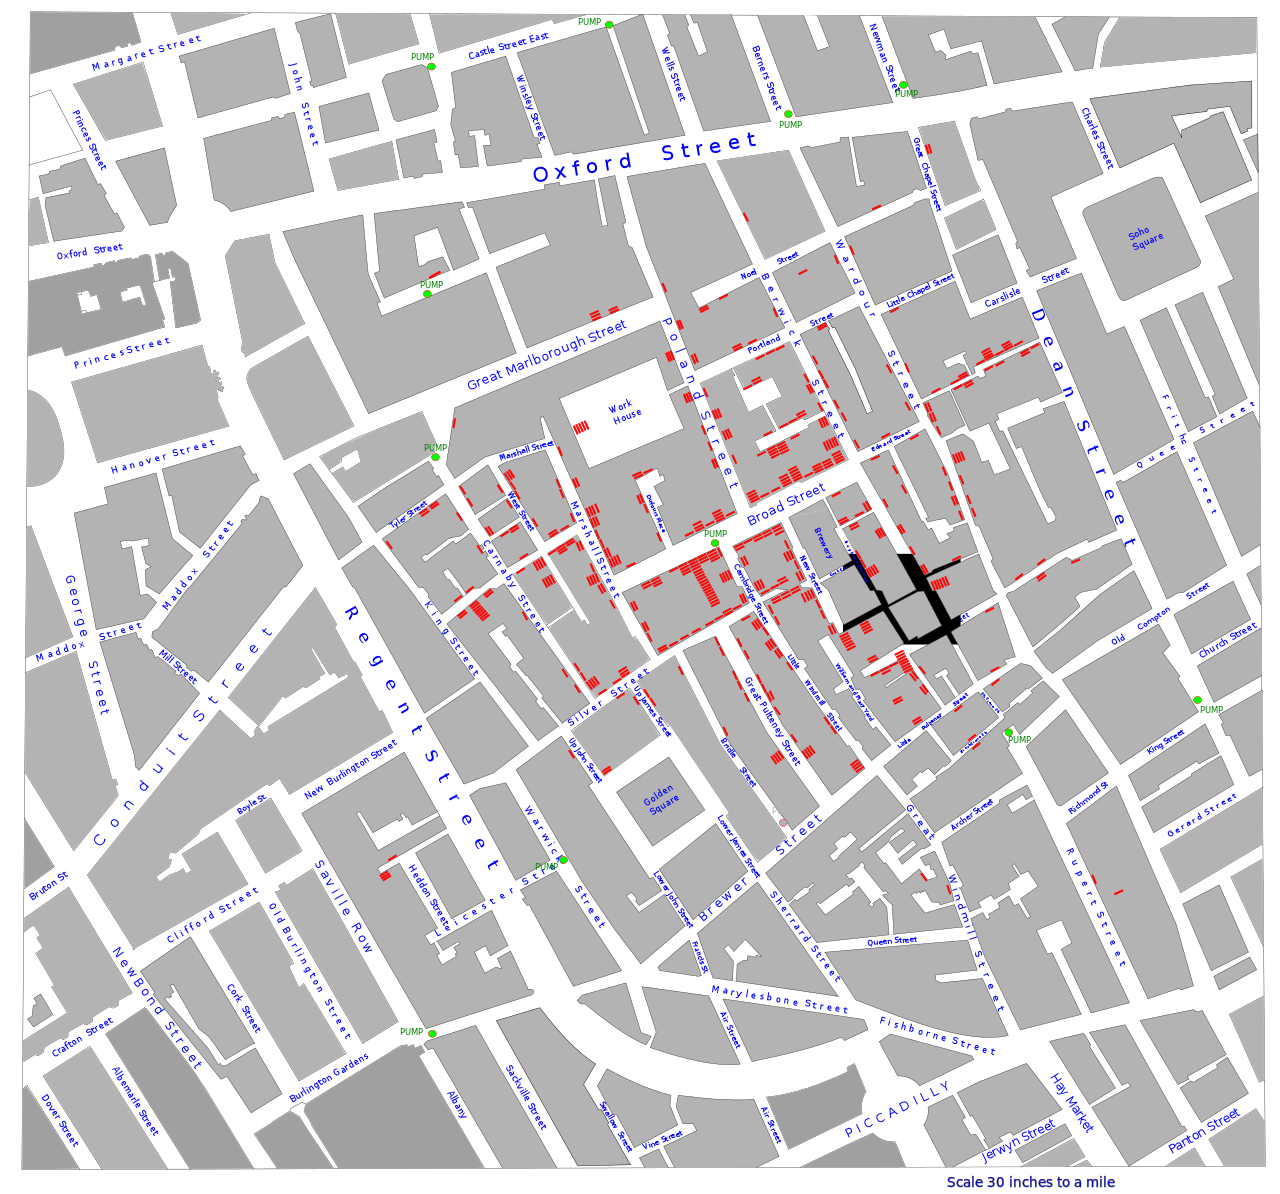 Figure 4: A representation of the 1854 map of cholera deaths by Snow. The map revealed a pattern of cases occurring near the Broad Street water pump, as shown in red.